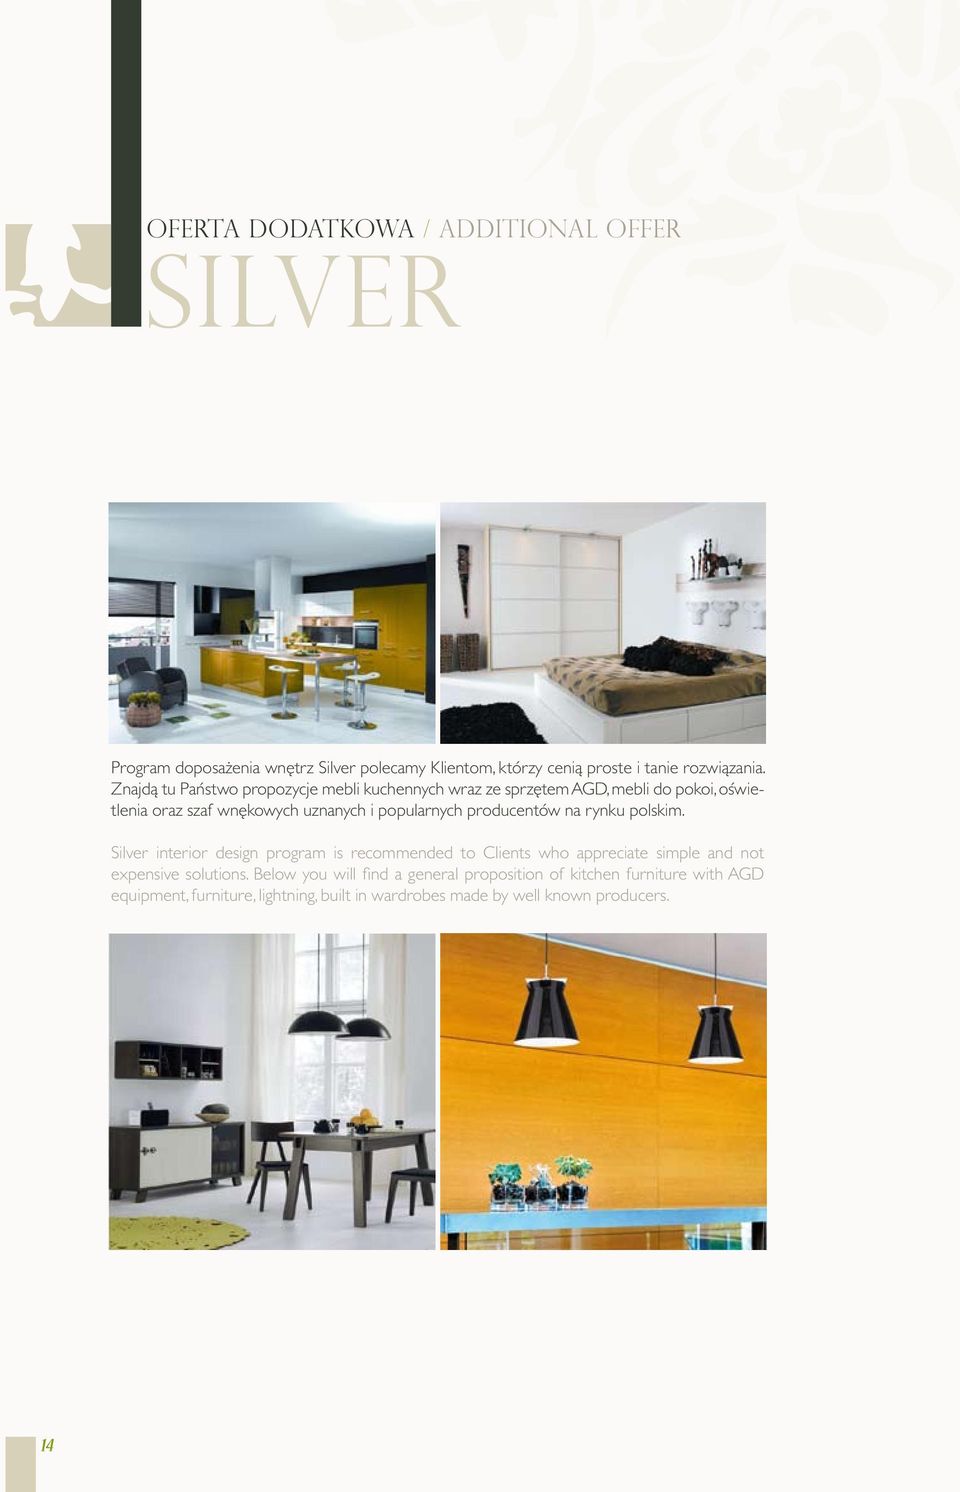 producentów na rynku polskim. Silver interior design program is recommended to Clients who appreciate simple and not expensive solutions.